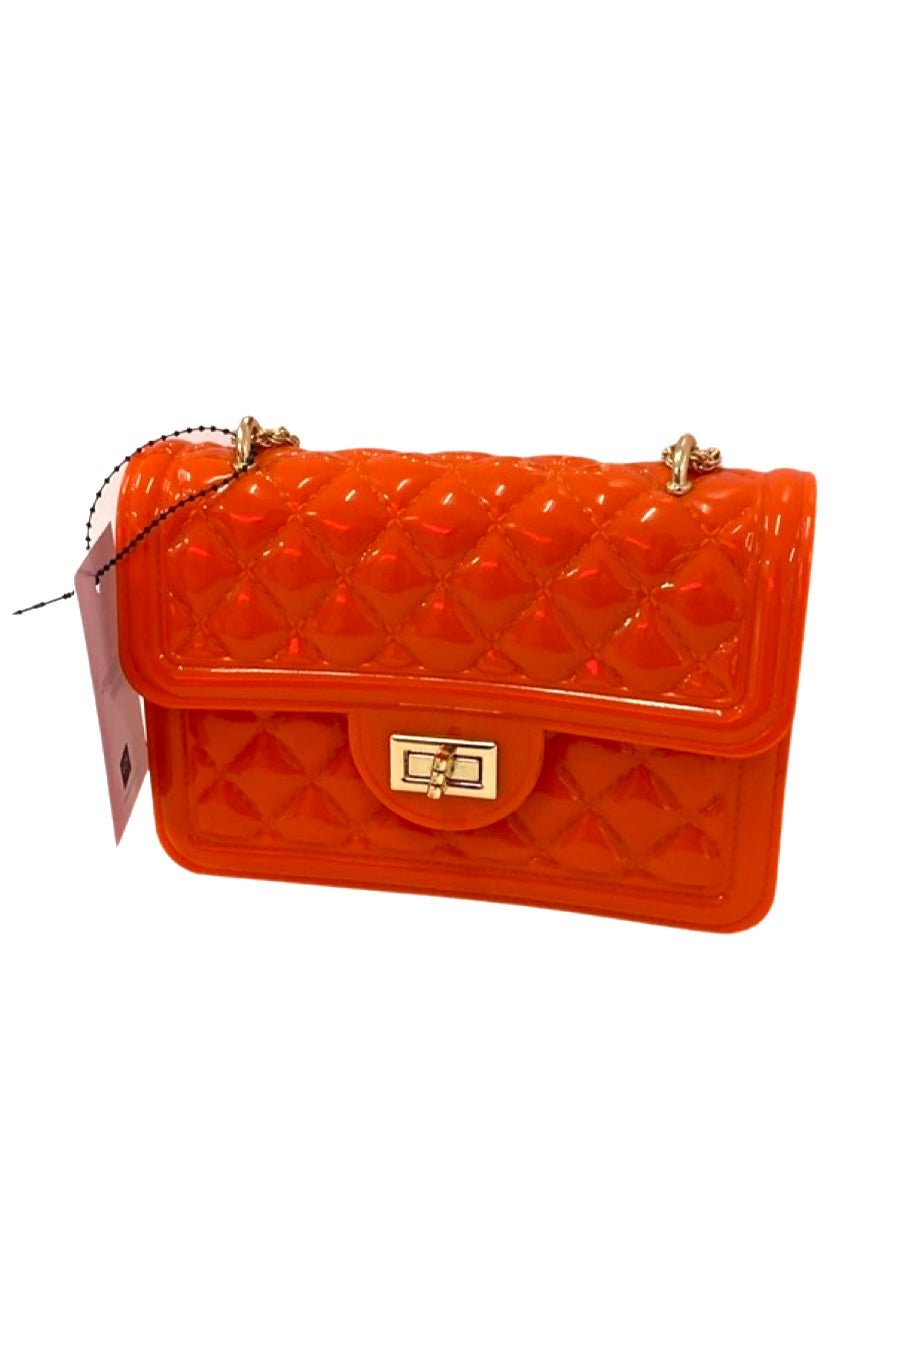 TRINNY QUILTED OVER SHOULDER BAG - IN STOCK